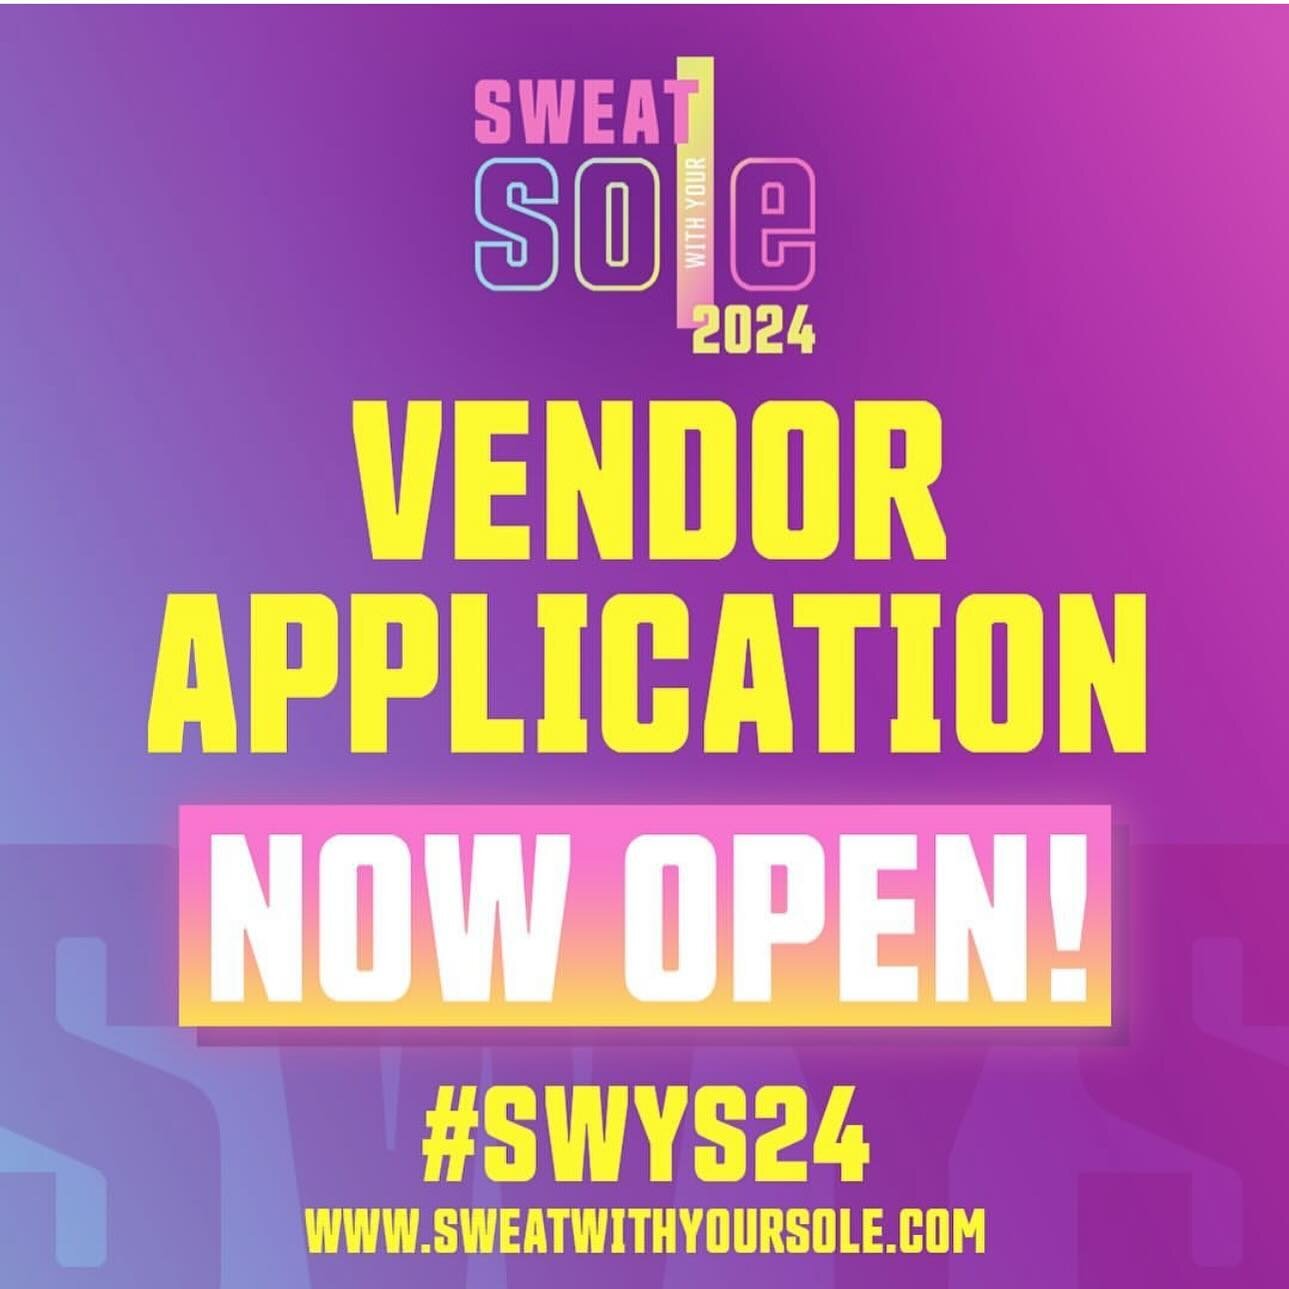 Do you have a product or service you want to get in front 👀 of hundreds of women passionate about health and fitness! Apply to be a part of our #SWYS24 Preserve the Sexy Vendor market! The application is open through March! 

sweatwithyoursole.com ?